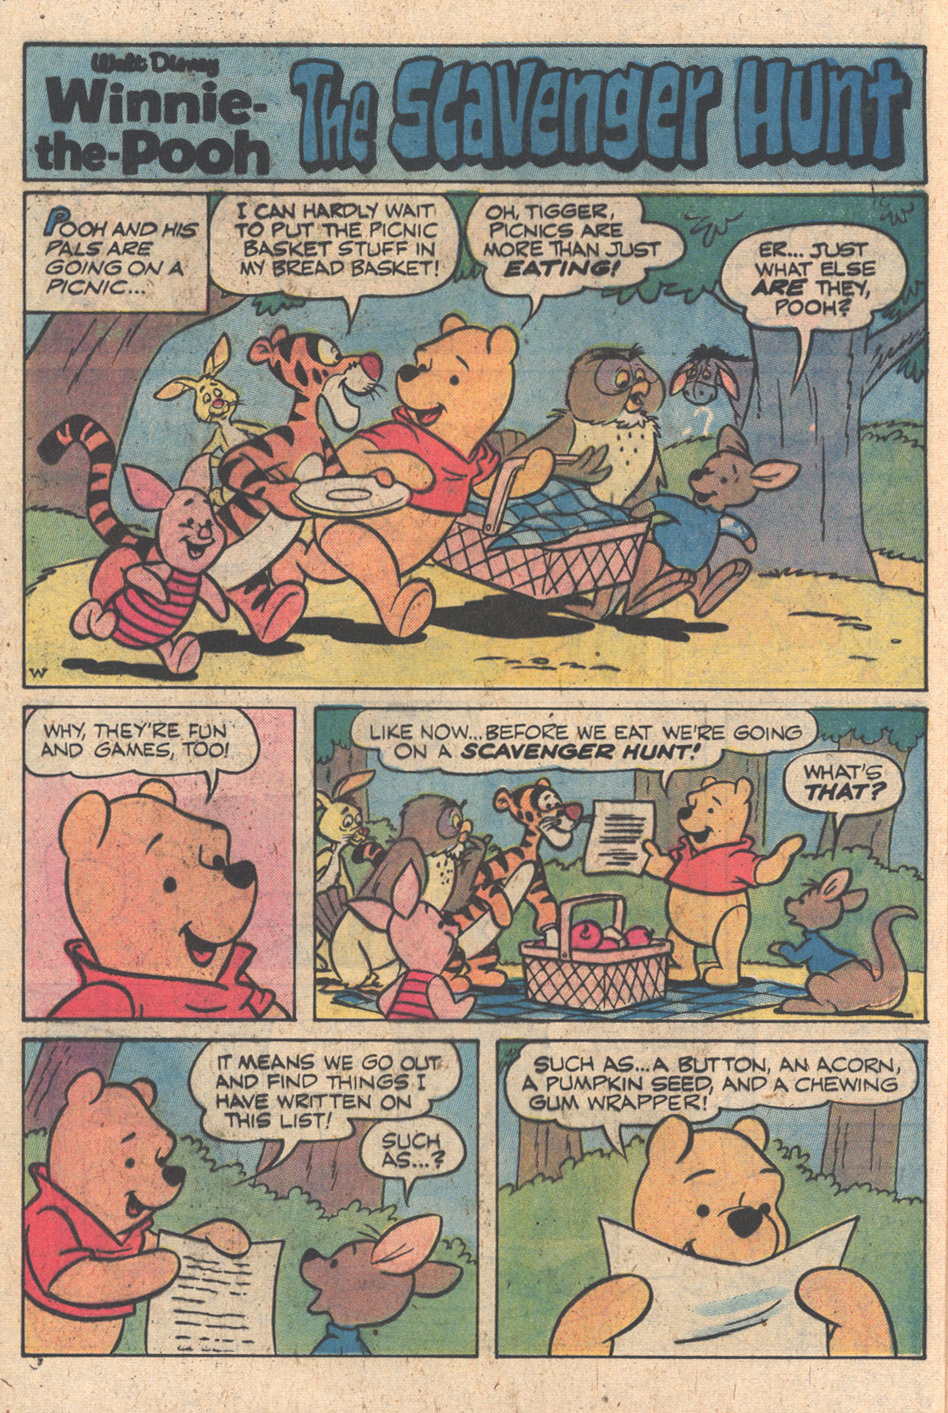 Read online Winnie-the-Pooh comic -  Issue #15 - 12